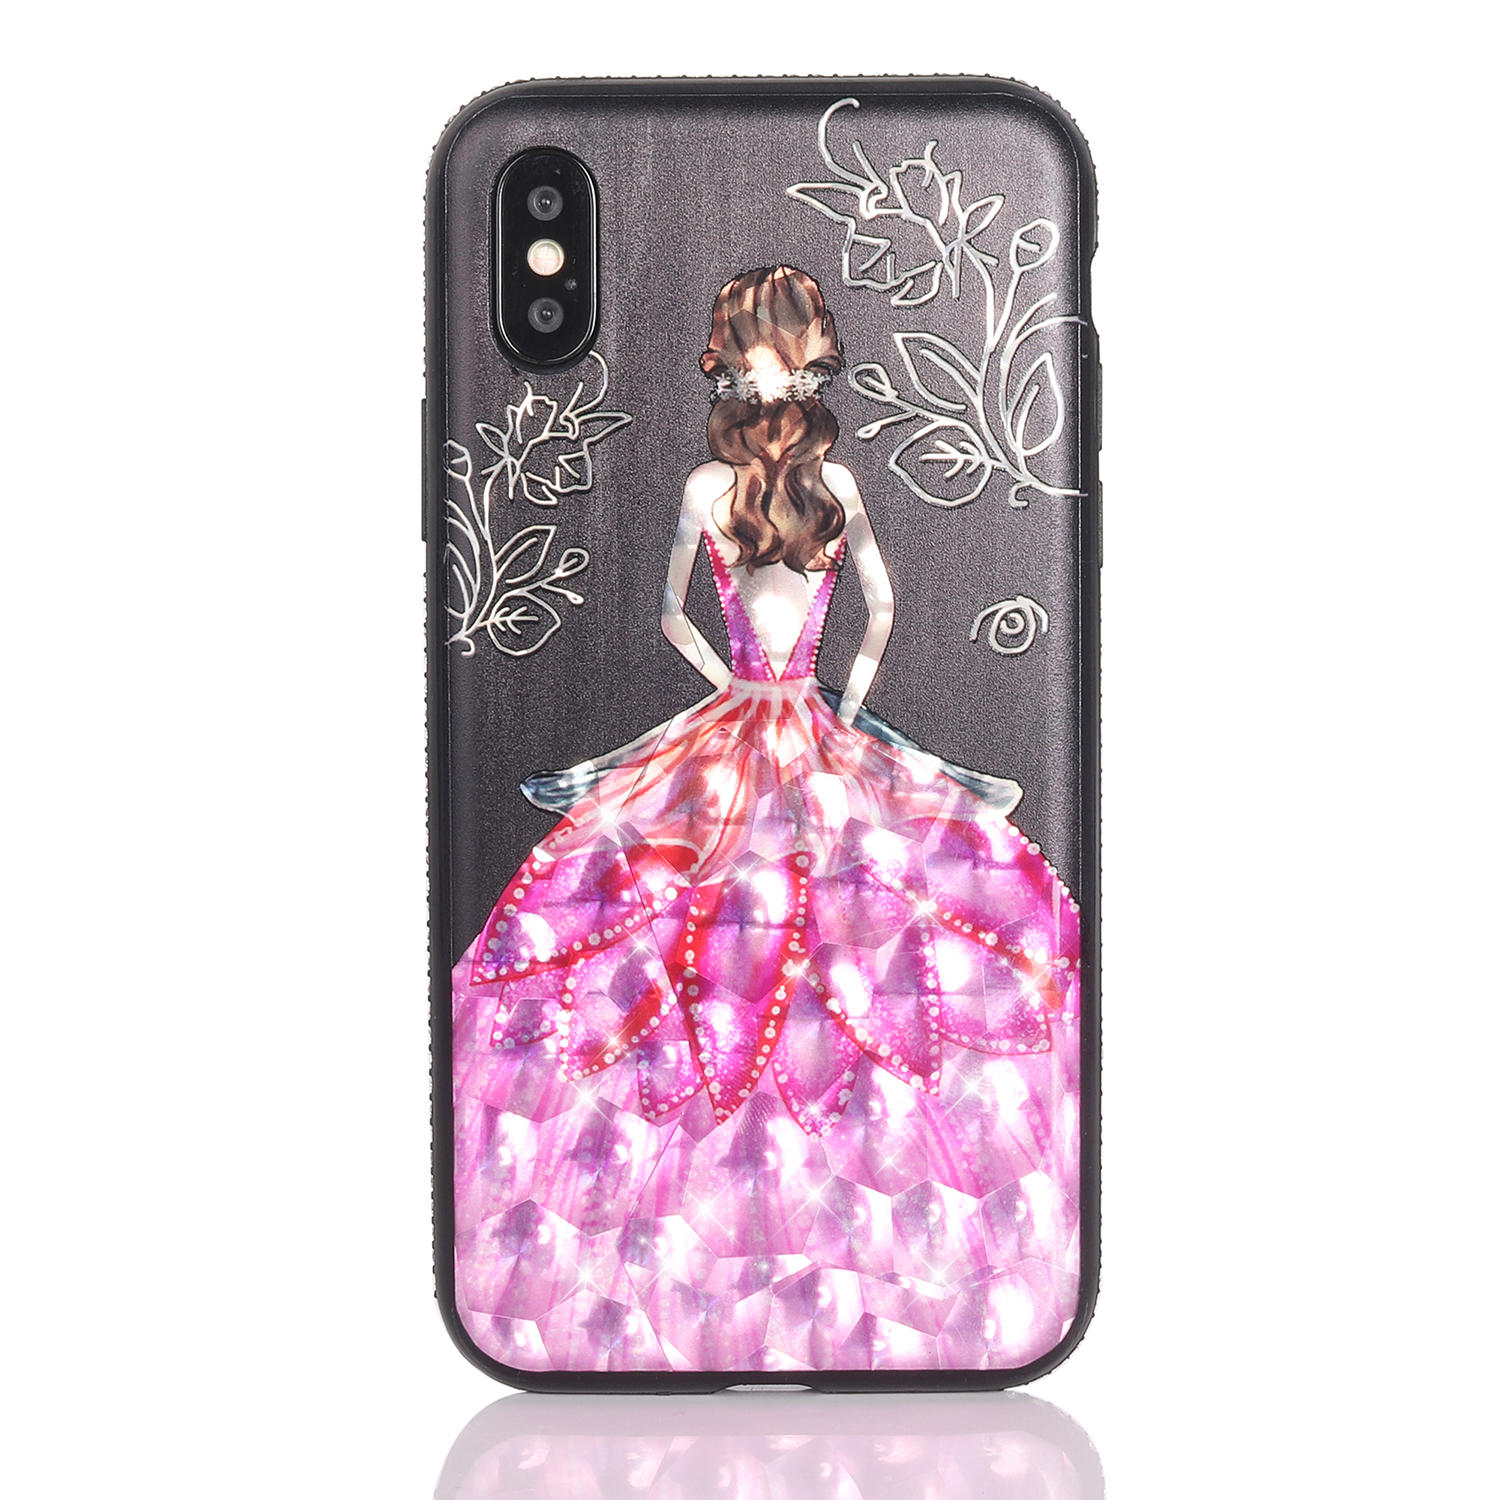 Bakeey 3D Painting Protective Case For iPhone X/8/8 Plus/7/7 Plus/6s Plus/6 Plus/6s/6 Pink Dress Glitter Bling COD